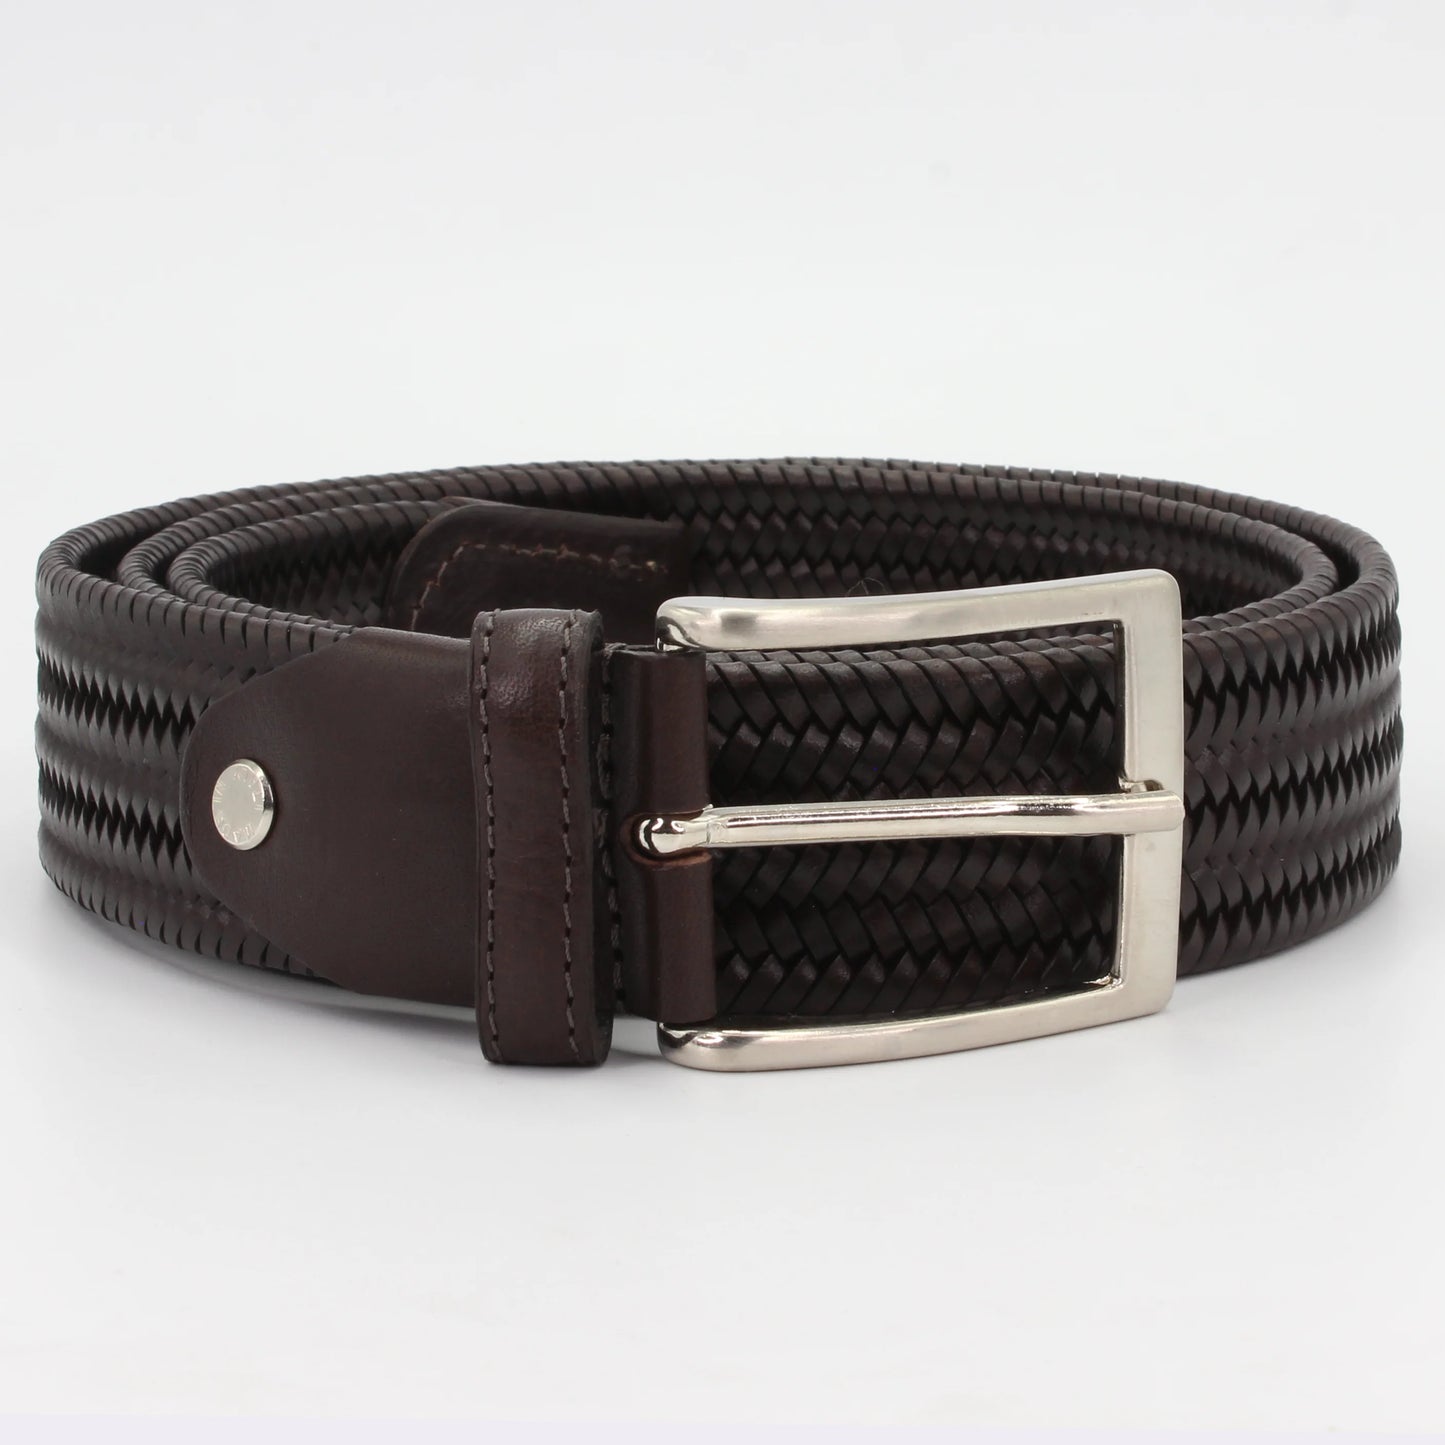 Shop our Italian-made Cuoieria Fiorentina woven Italian leather belt in testa di moro (CIODGEL00G000) or browse our range of Italian belts for men & women in-store at Aliverti Cape Town, or shop online.   We deliver in South Africa & offer multiple payment plans as well as accept multiple safe & secure payment methods.